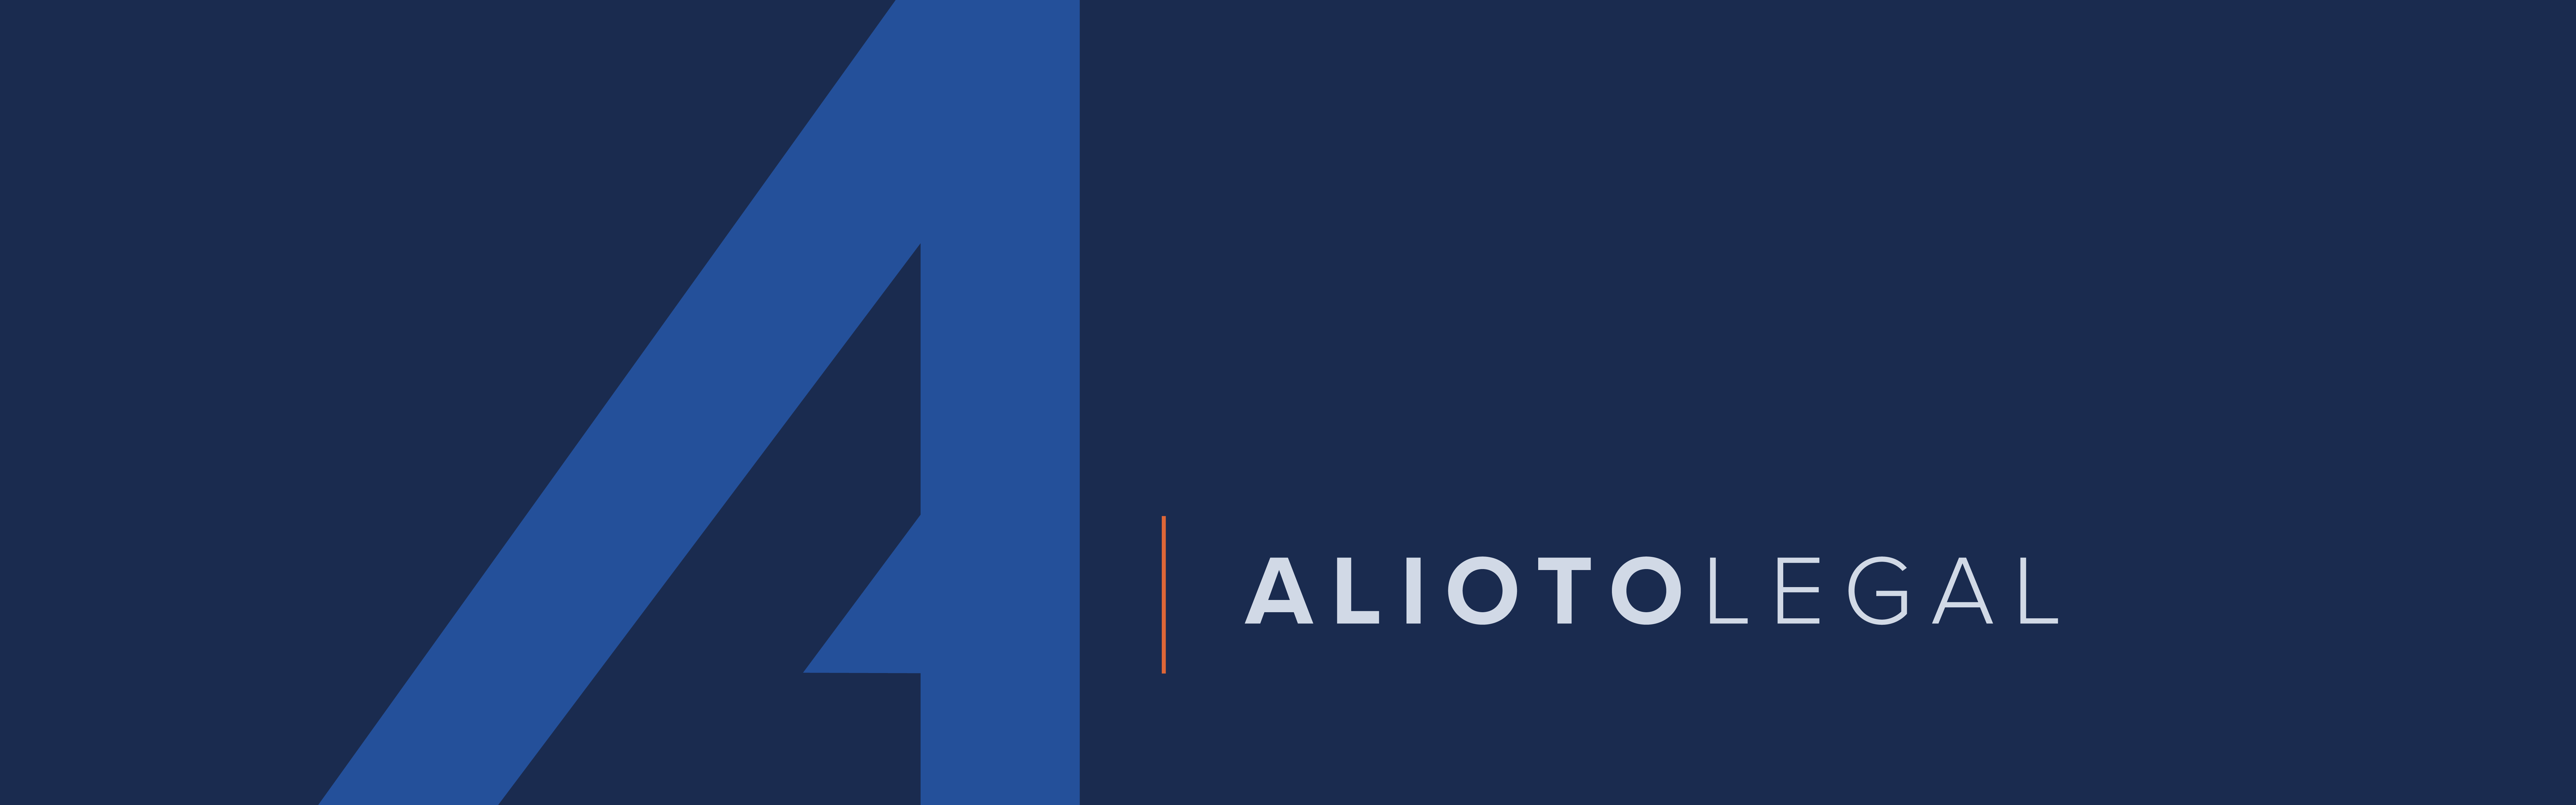 A blue graphic banner featuring a large letter 'a' with the text "Alioto Legal" aligned to its right.